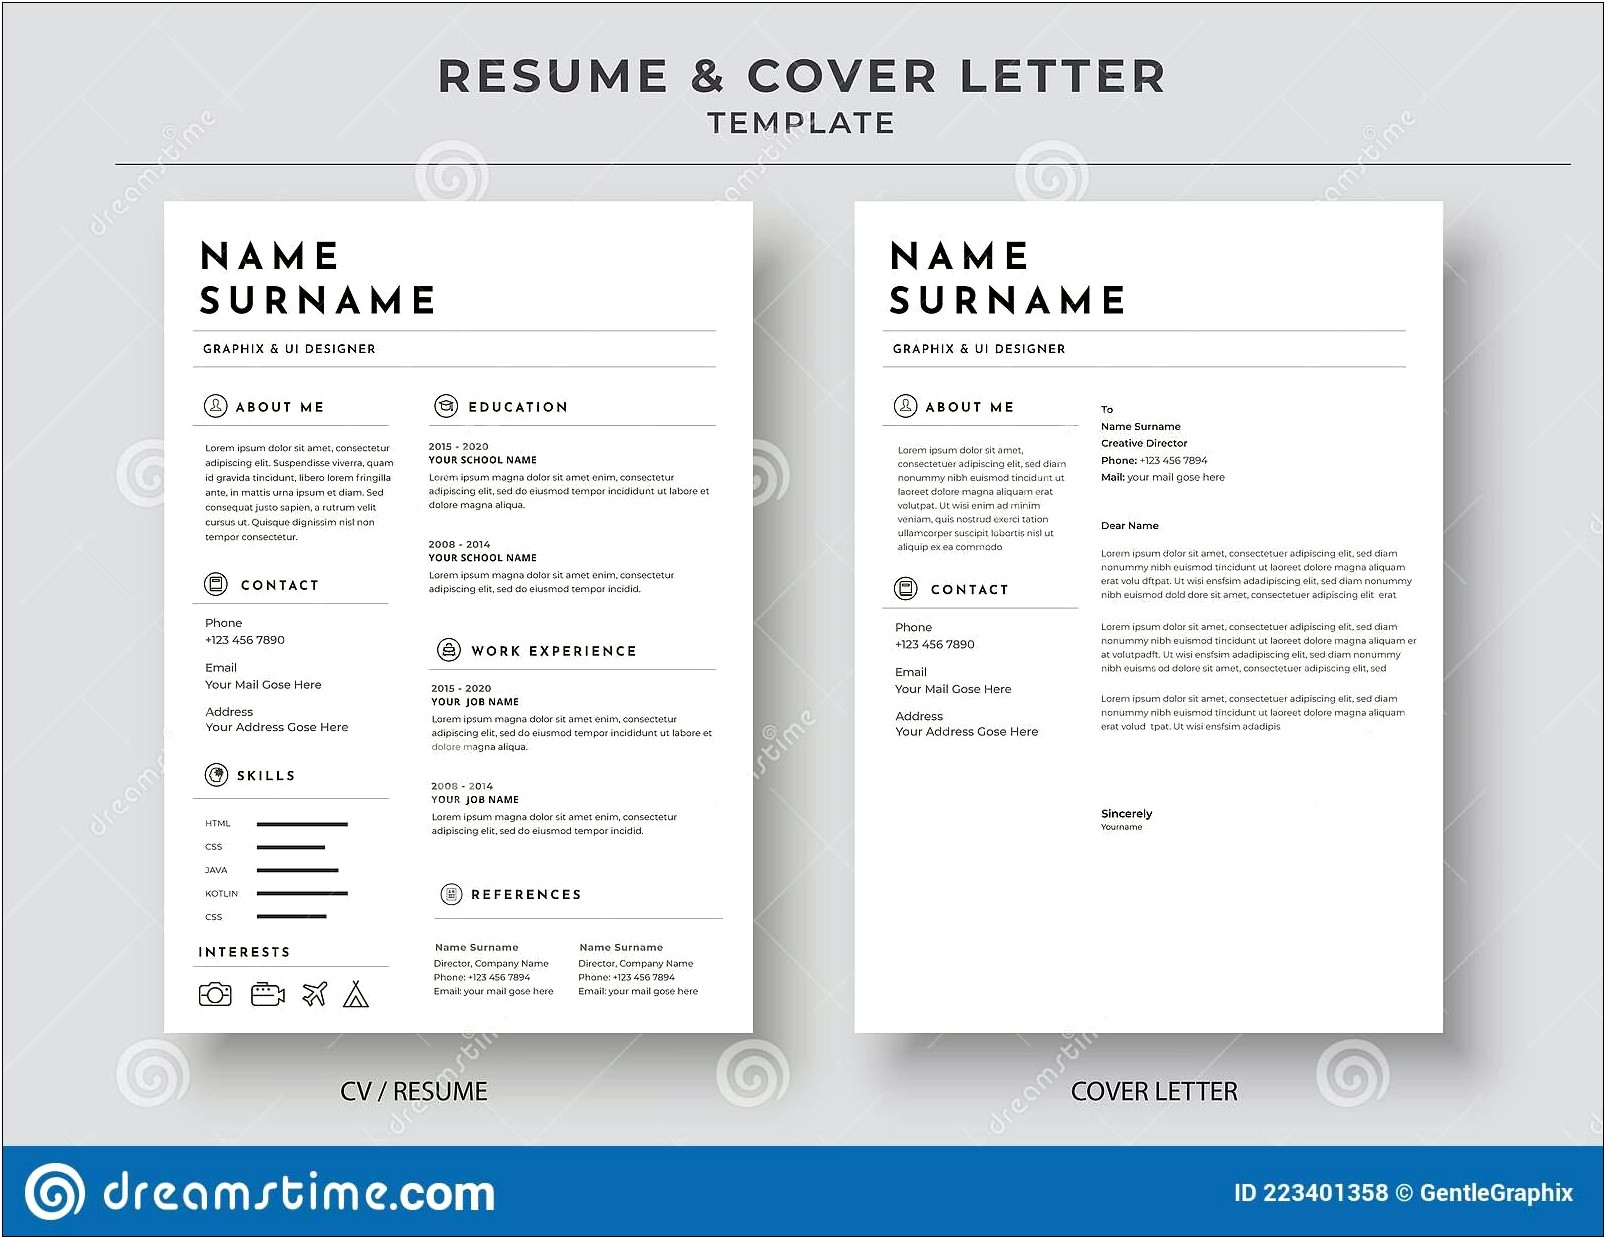 Resume Job Had Me In Different Positions